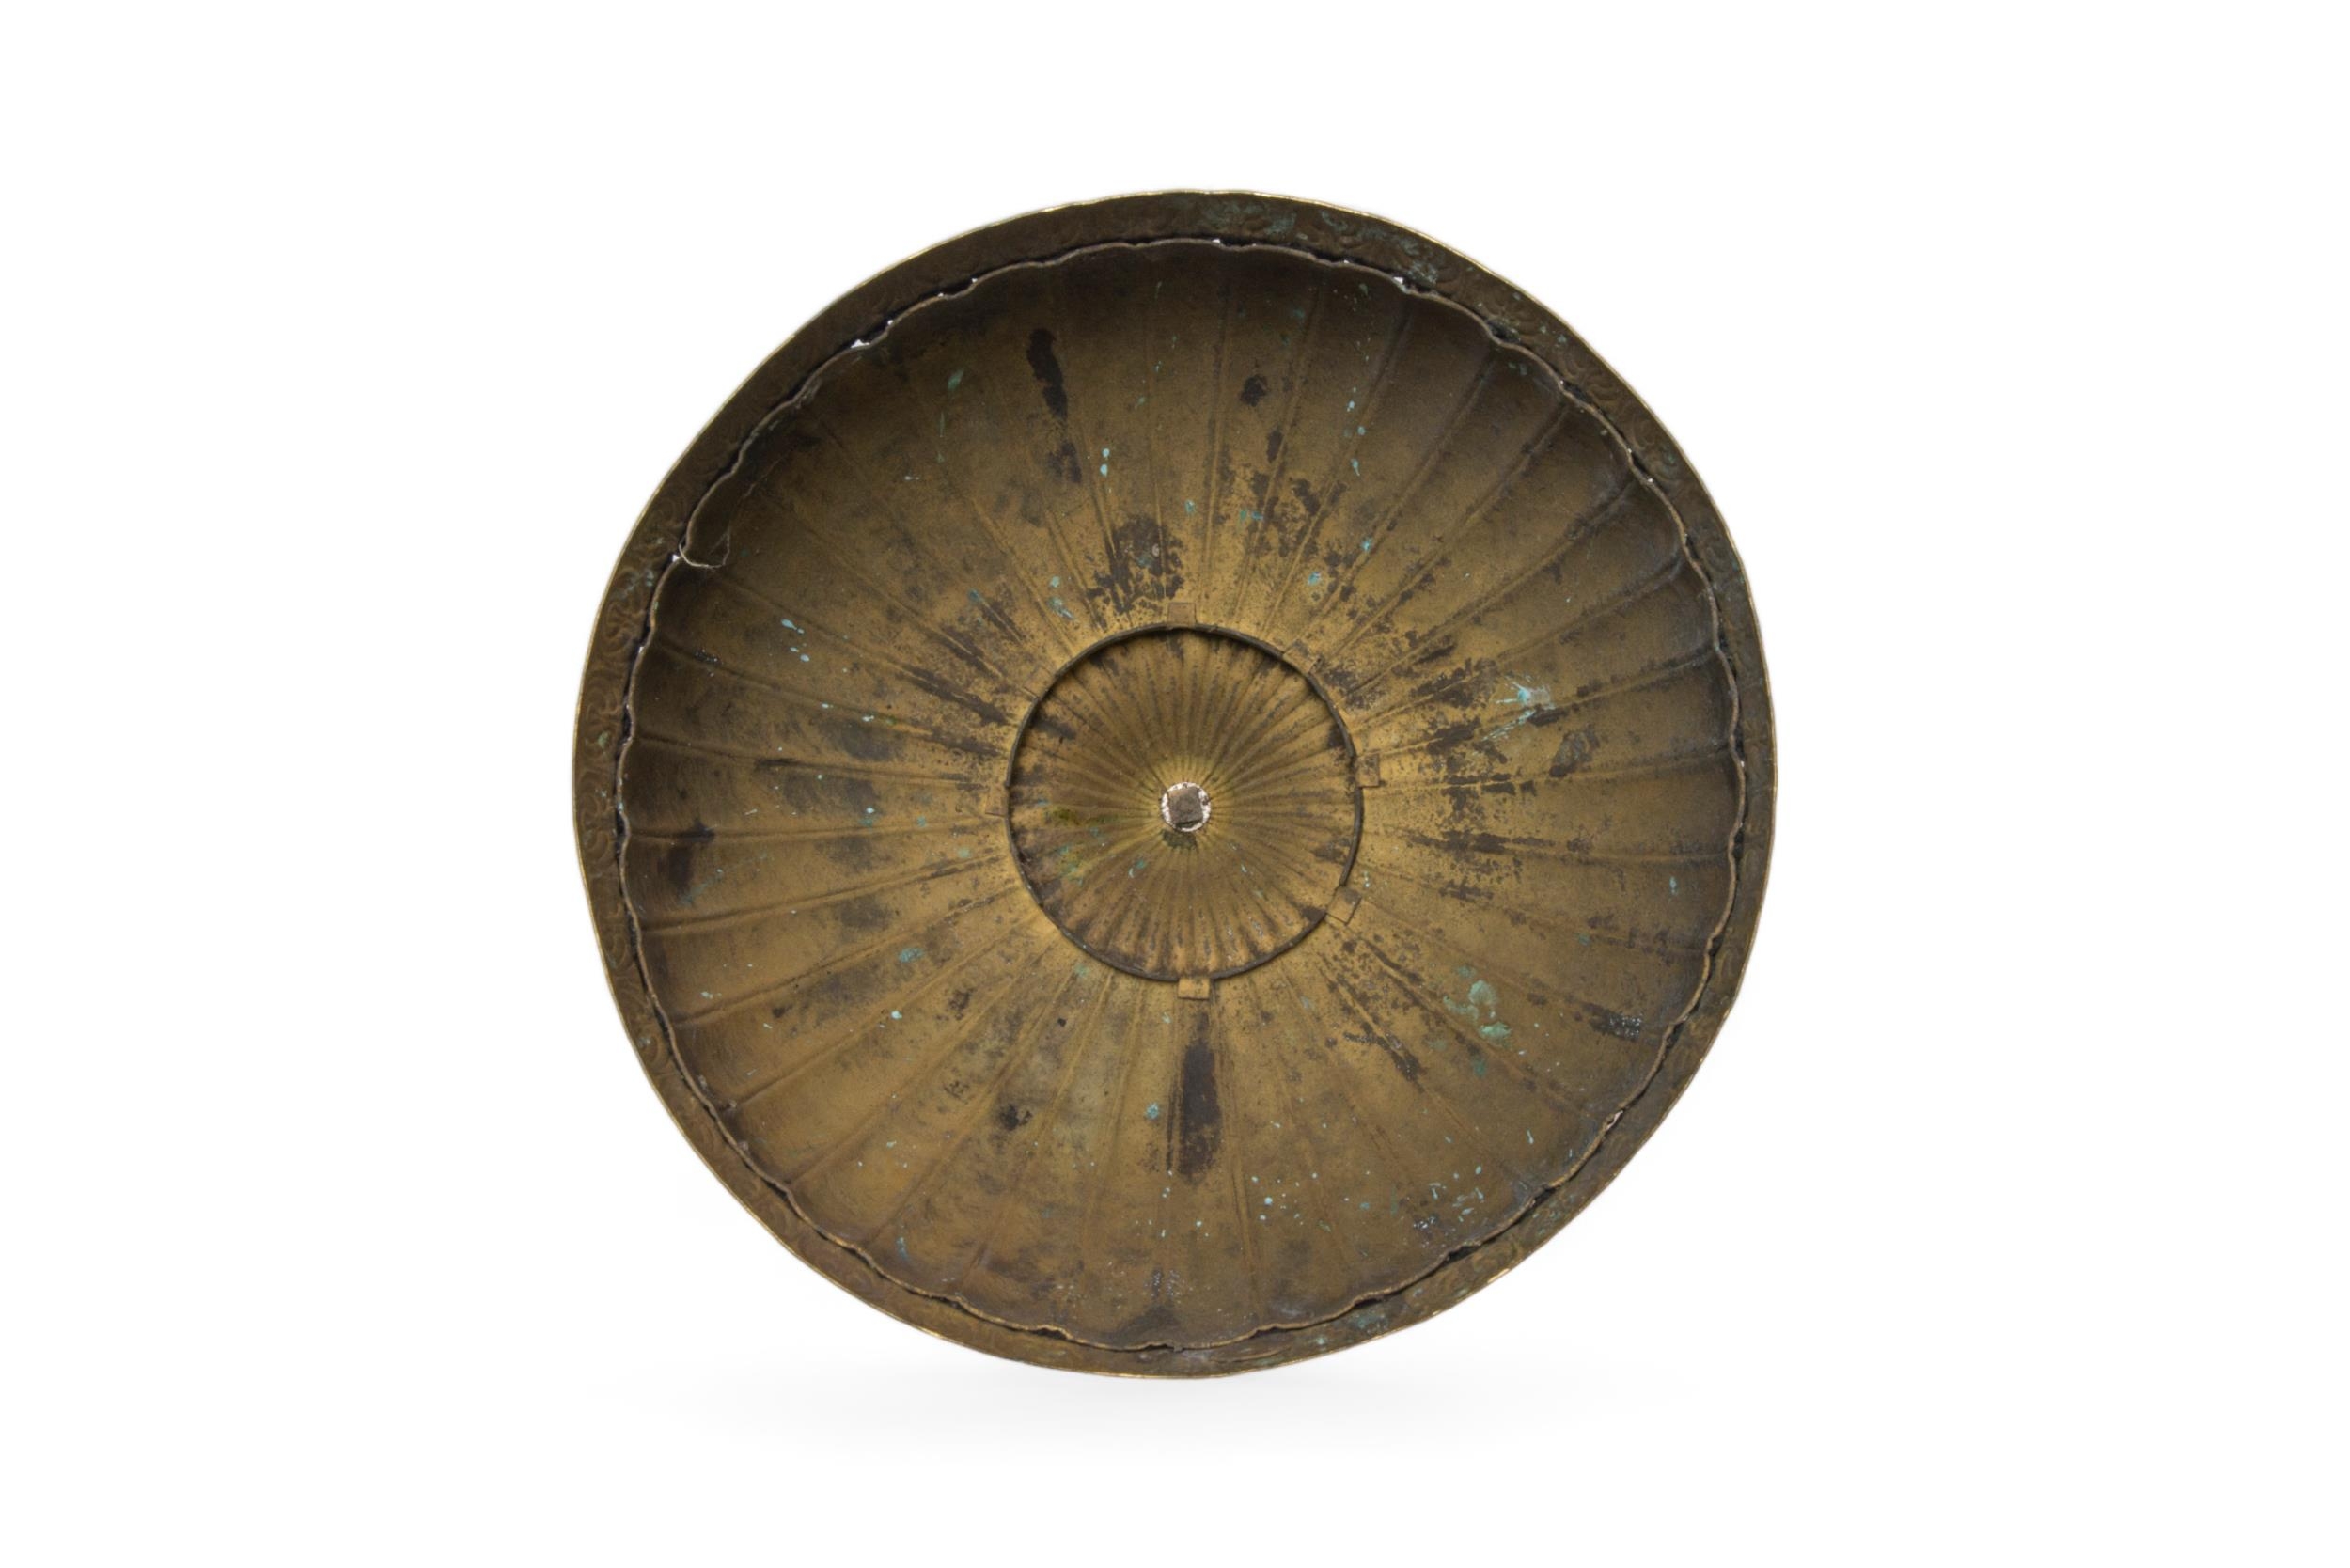 A BRASS MUGHAL STYLE DOME, POSSIBLY A BED CANOPY, 20TH CENTURY. 47cms high - Image 2 of 2